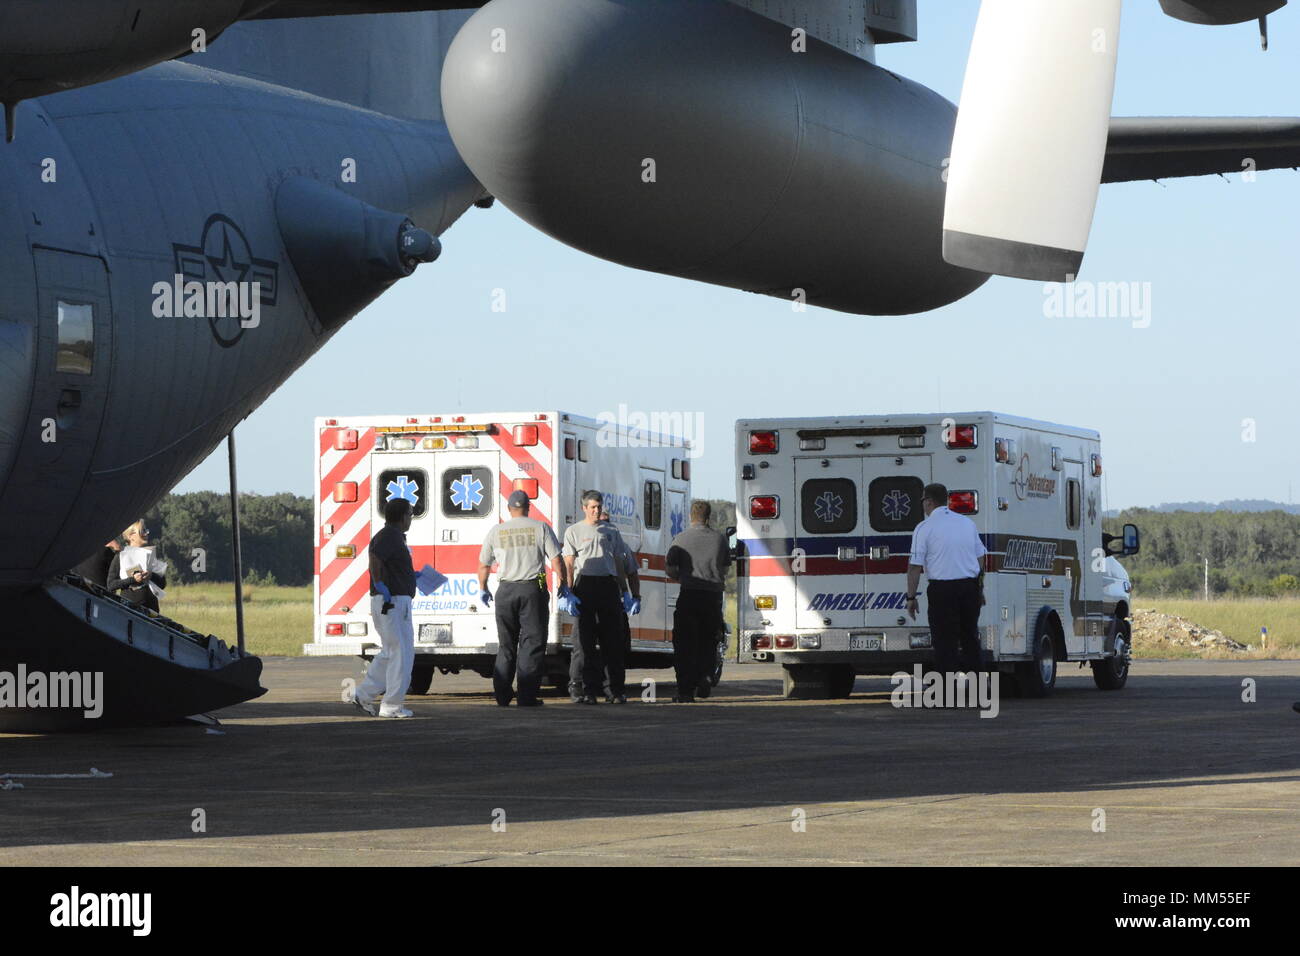 Two ambulances from the Gadsden Alabama Regional Medical Center back up to a North Carolina Air National Guard C-130 Hercules to receive patients evacuated from Key West Florida prior to the arrival of Hurricane Irma, the 156th Aeromedical Evacuation Squadron transported eleven patients into the hands of Gadsden Alabama first responders, while at the Northeast Alabama Regional Airport, Gadsden Alabama, Sept. 6, 2017. Hurricane Irma is a category five storm that is expected to cause catastrophic damage to the regions it makes landfall. The 156th Aeromedical Evacuation Squadron of the North Caro Stock Photo